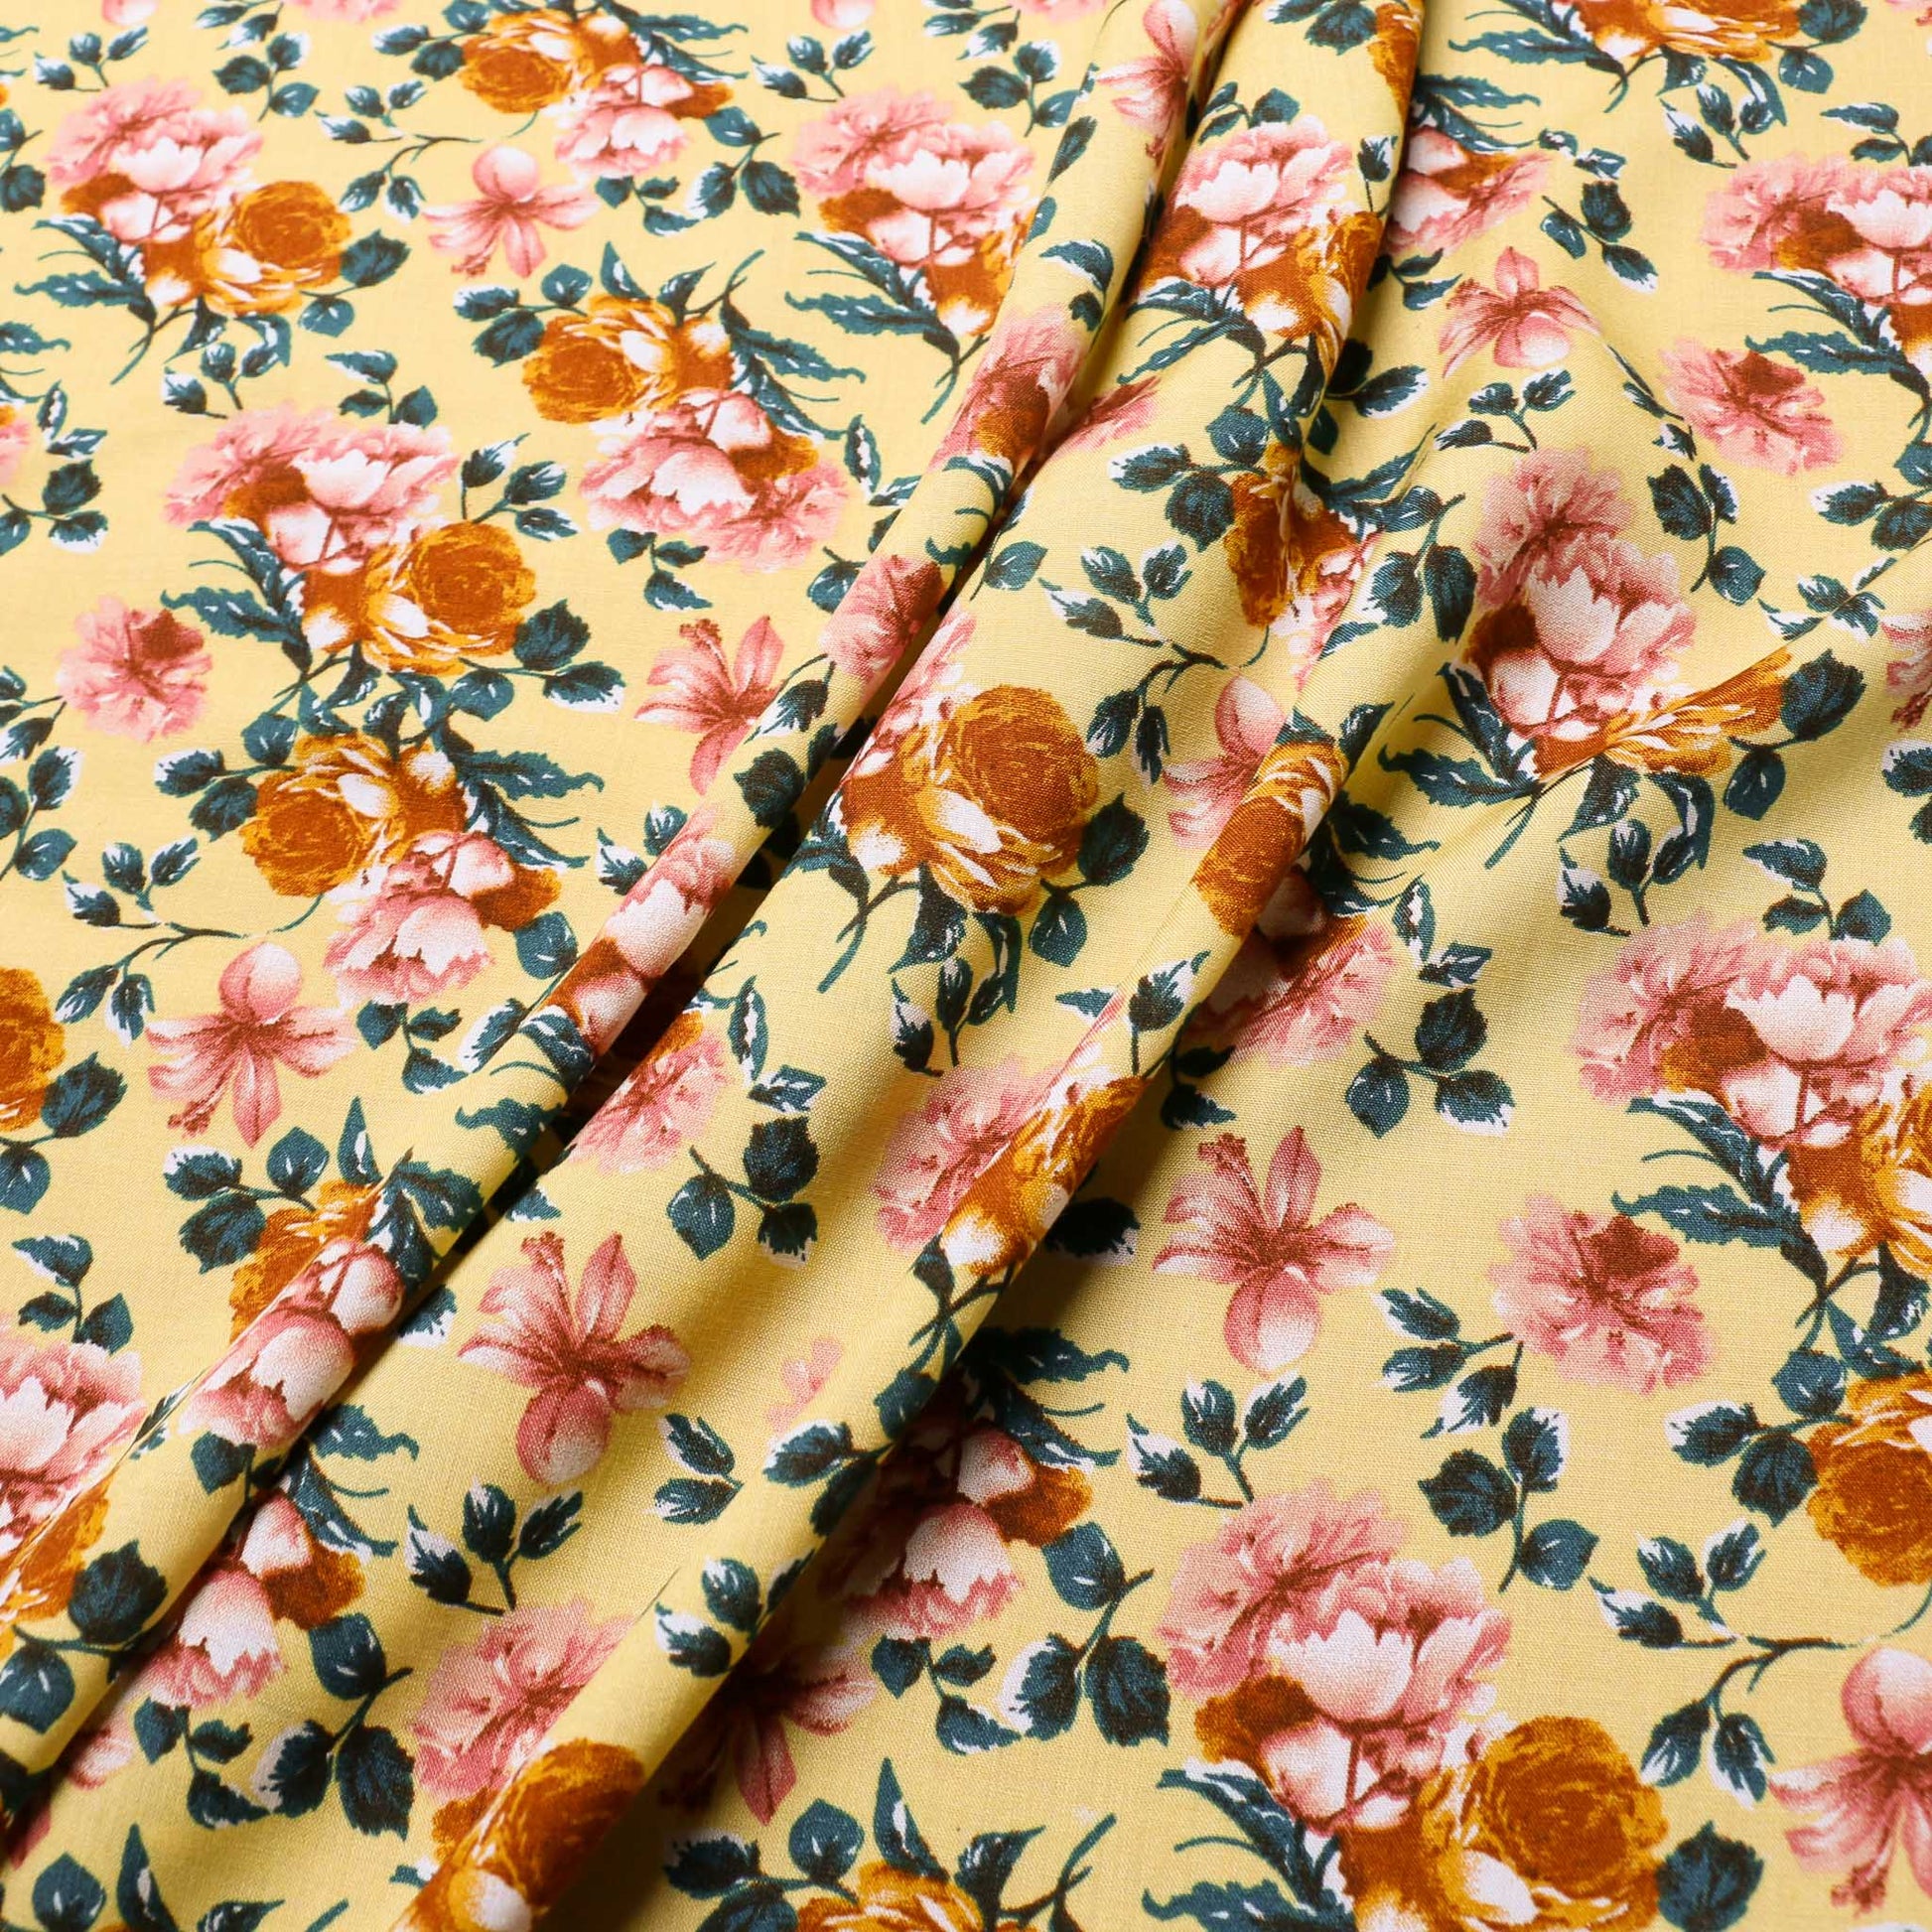 rose patterned viscose challis dressmaking fabric in yellow